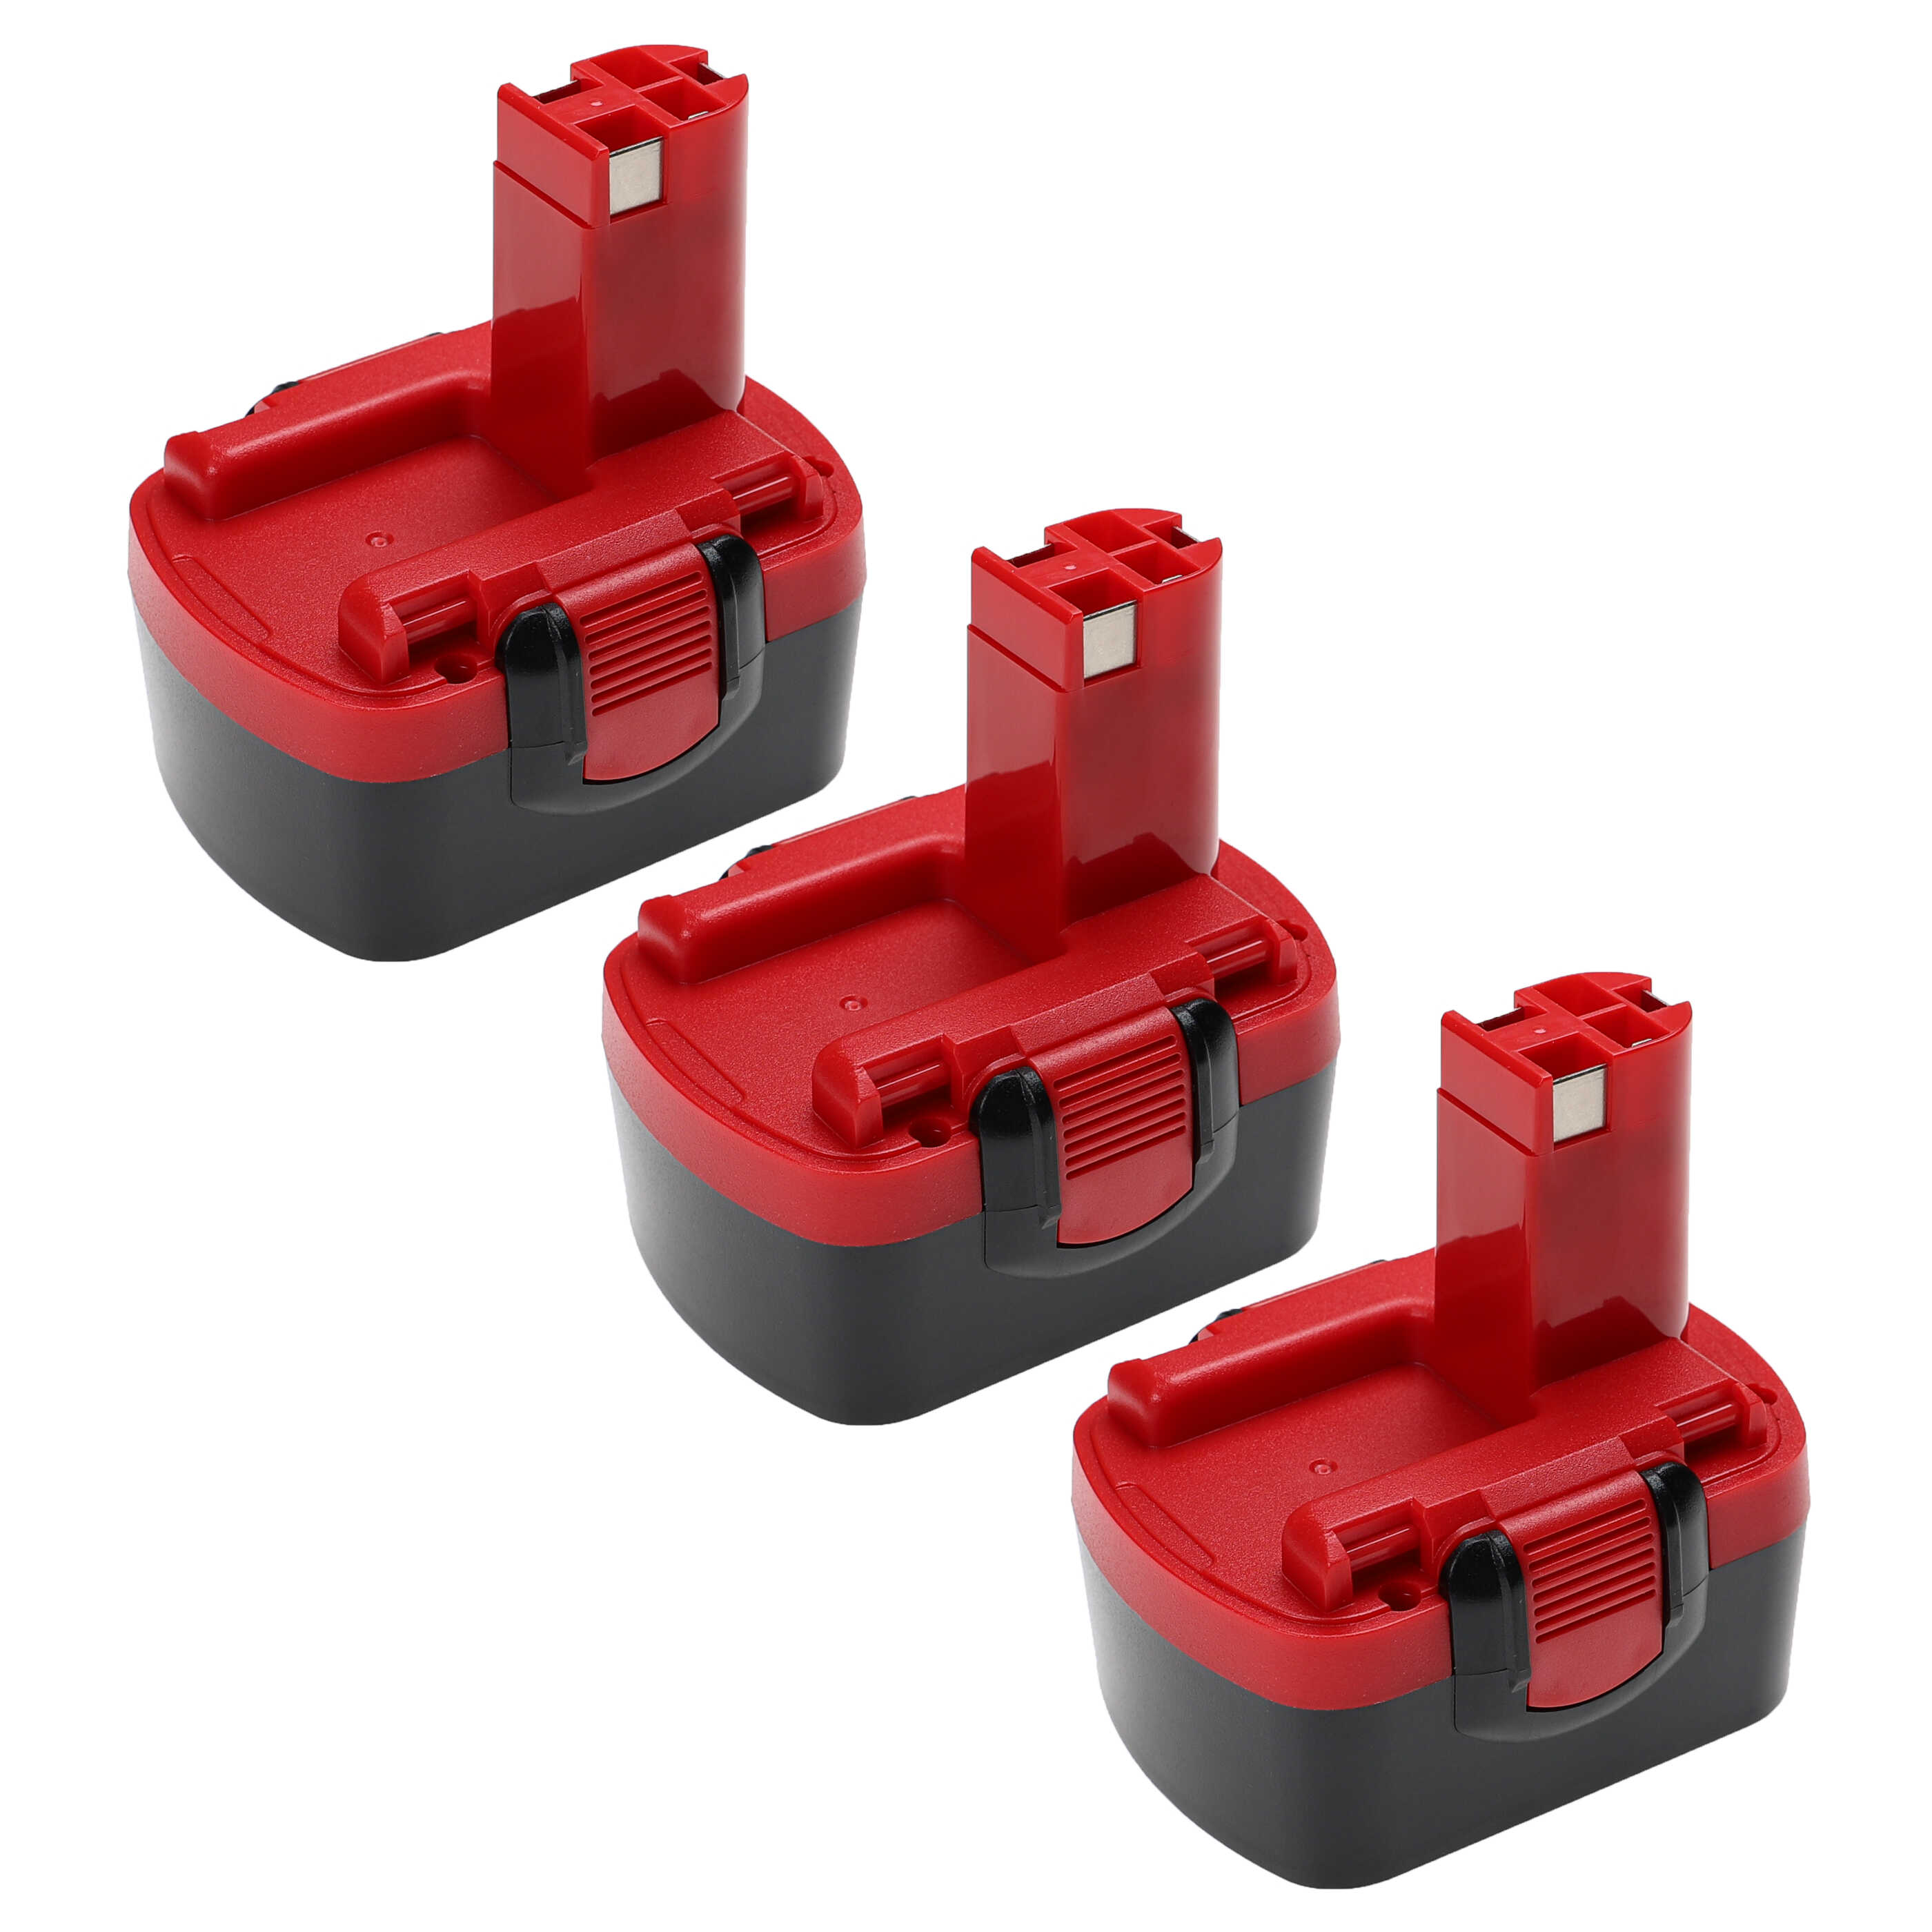 Electric Power Tool Battery (3x Unit) Replaces Bosch 2 607 335 263, 1617S0004W - 2500 mAh, 14.4 V, NiMH